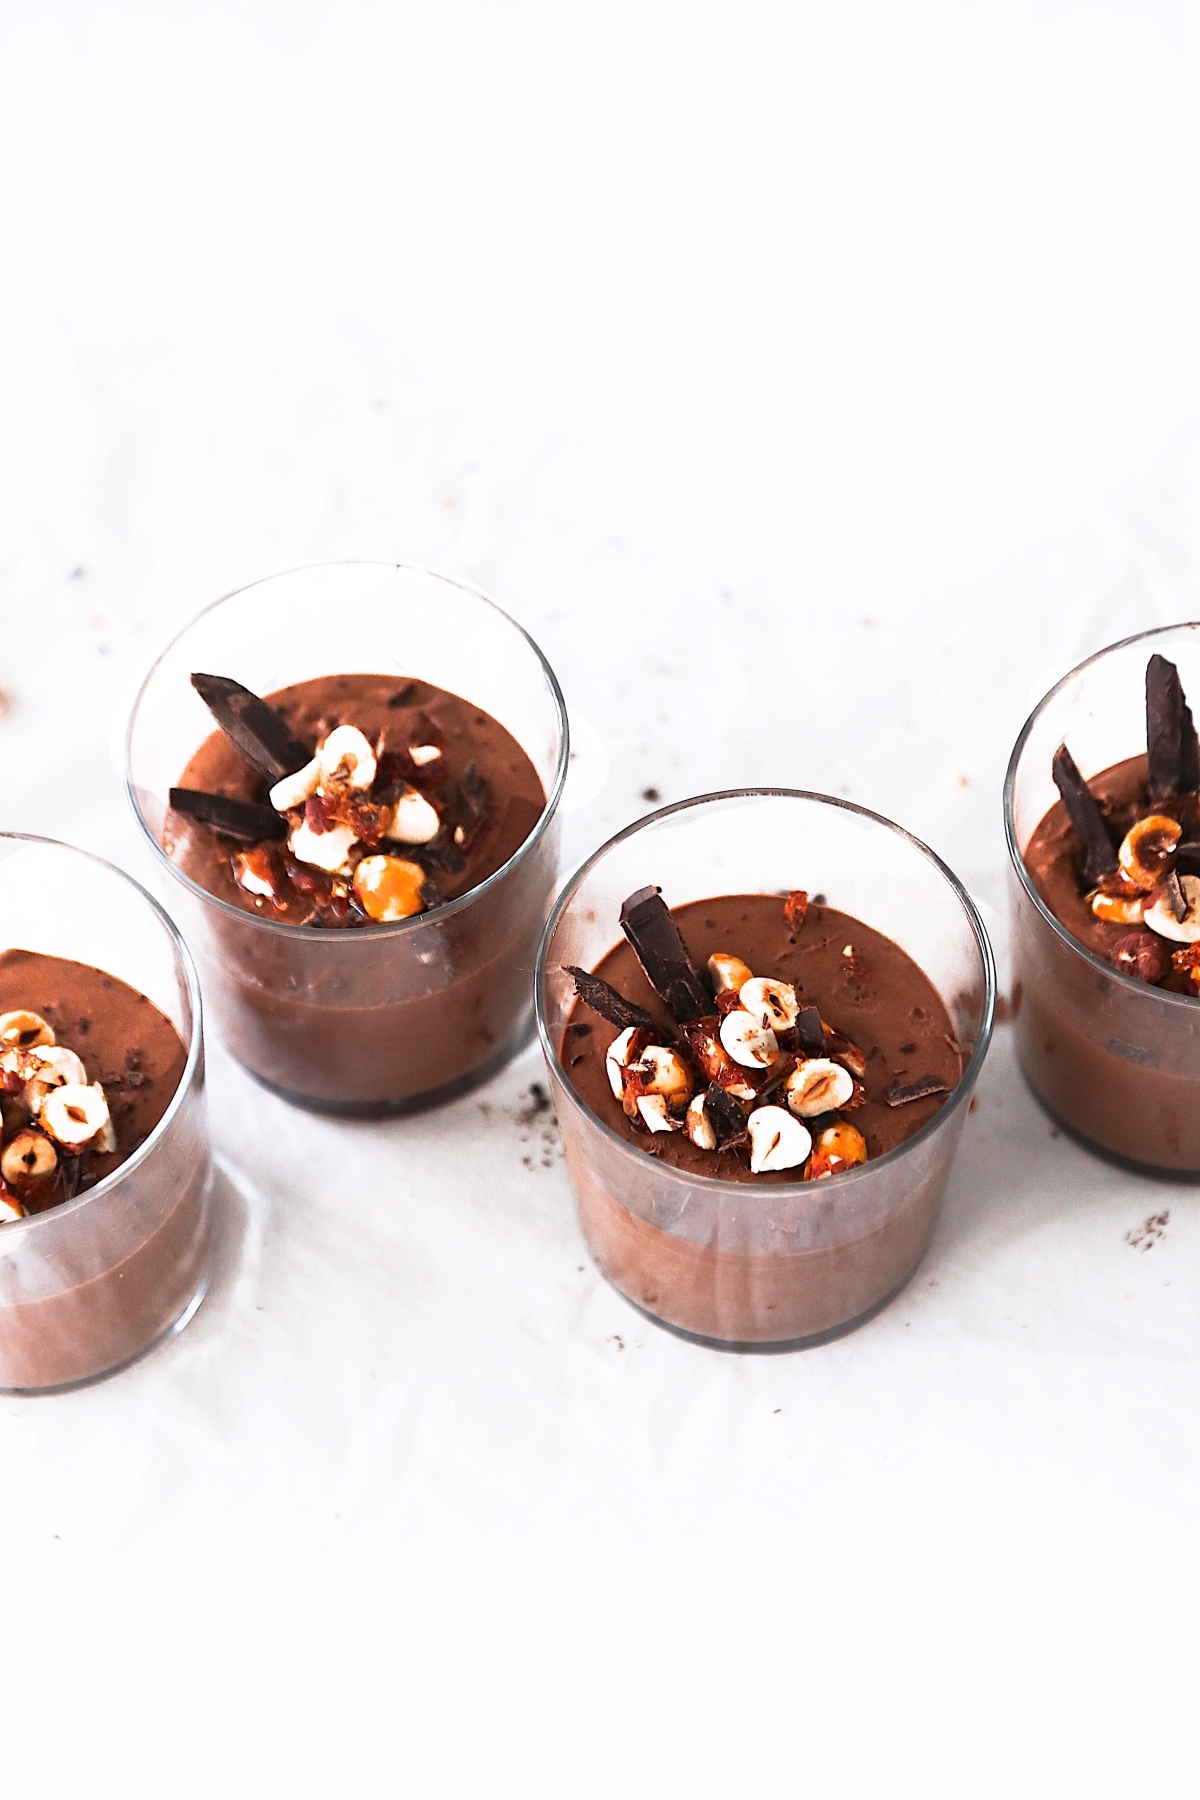 Chocolate Mousse Final 1